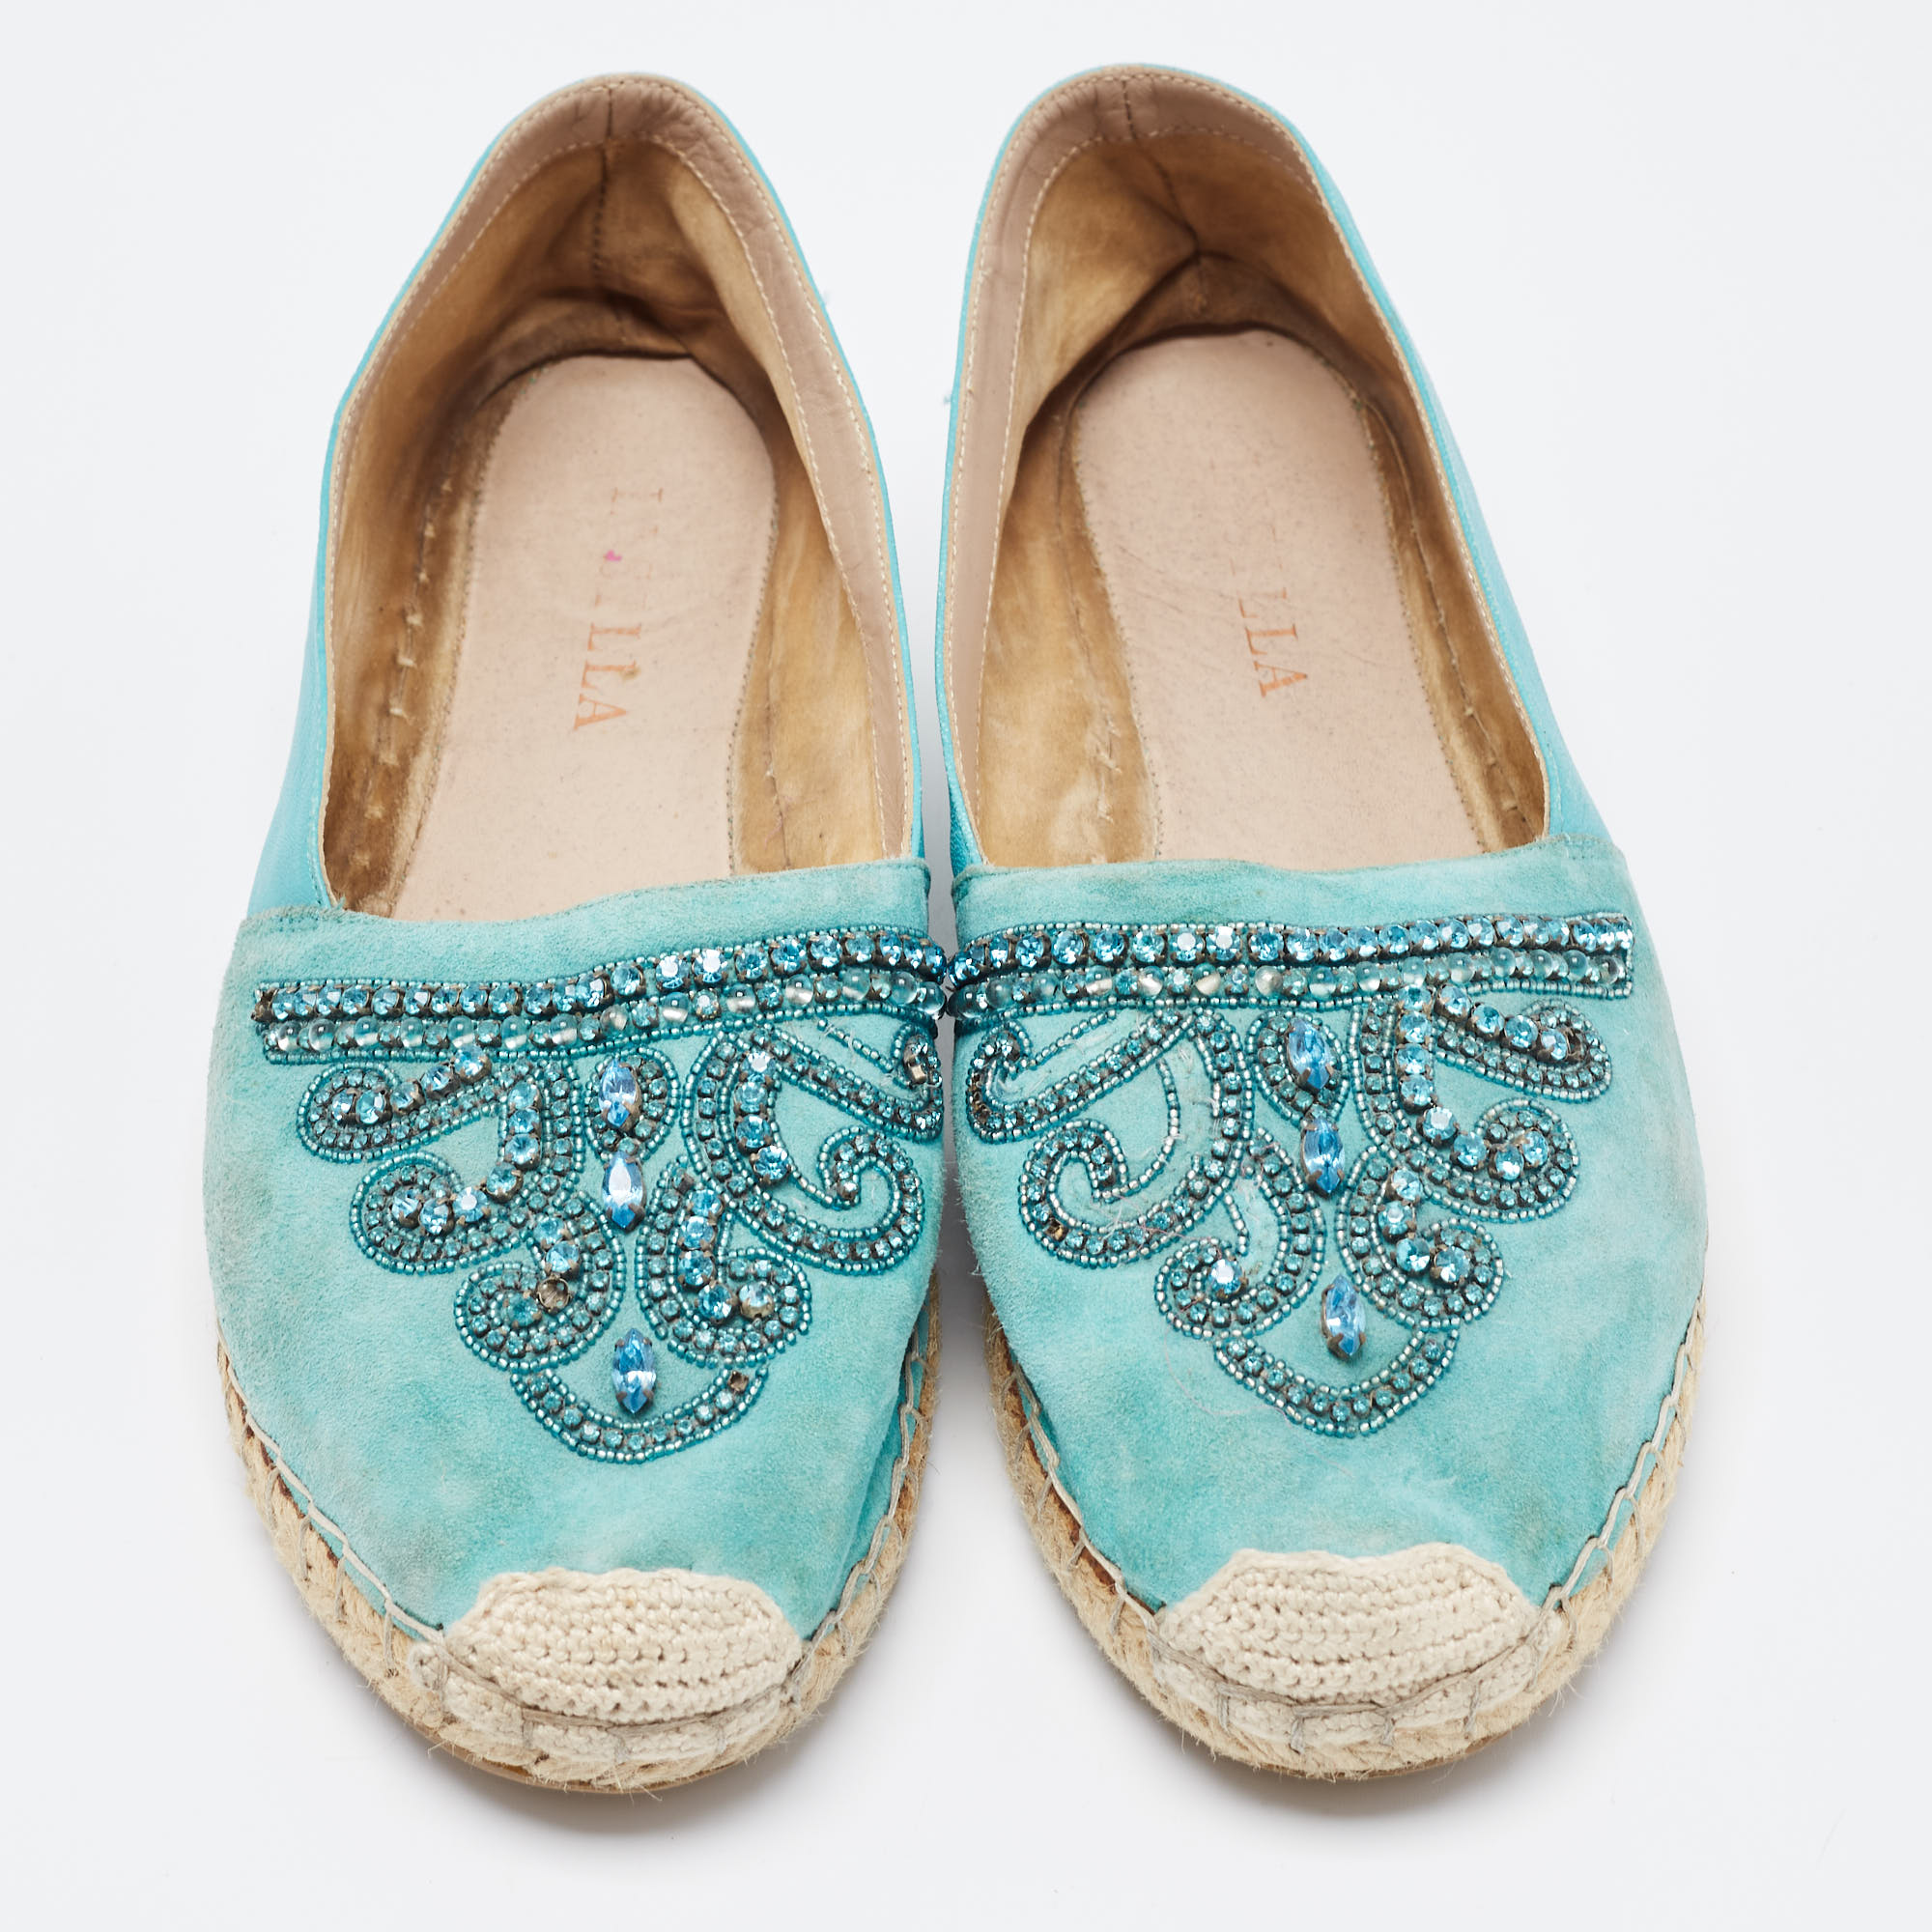 Le Silla Turquoise Suede And Leather Crystal Embellished Espadrille Flats Size 39